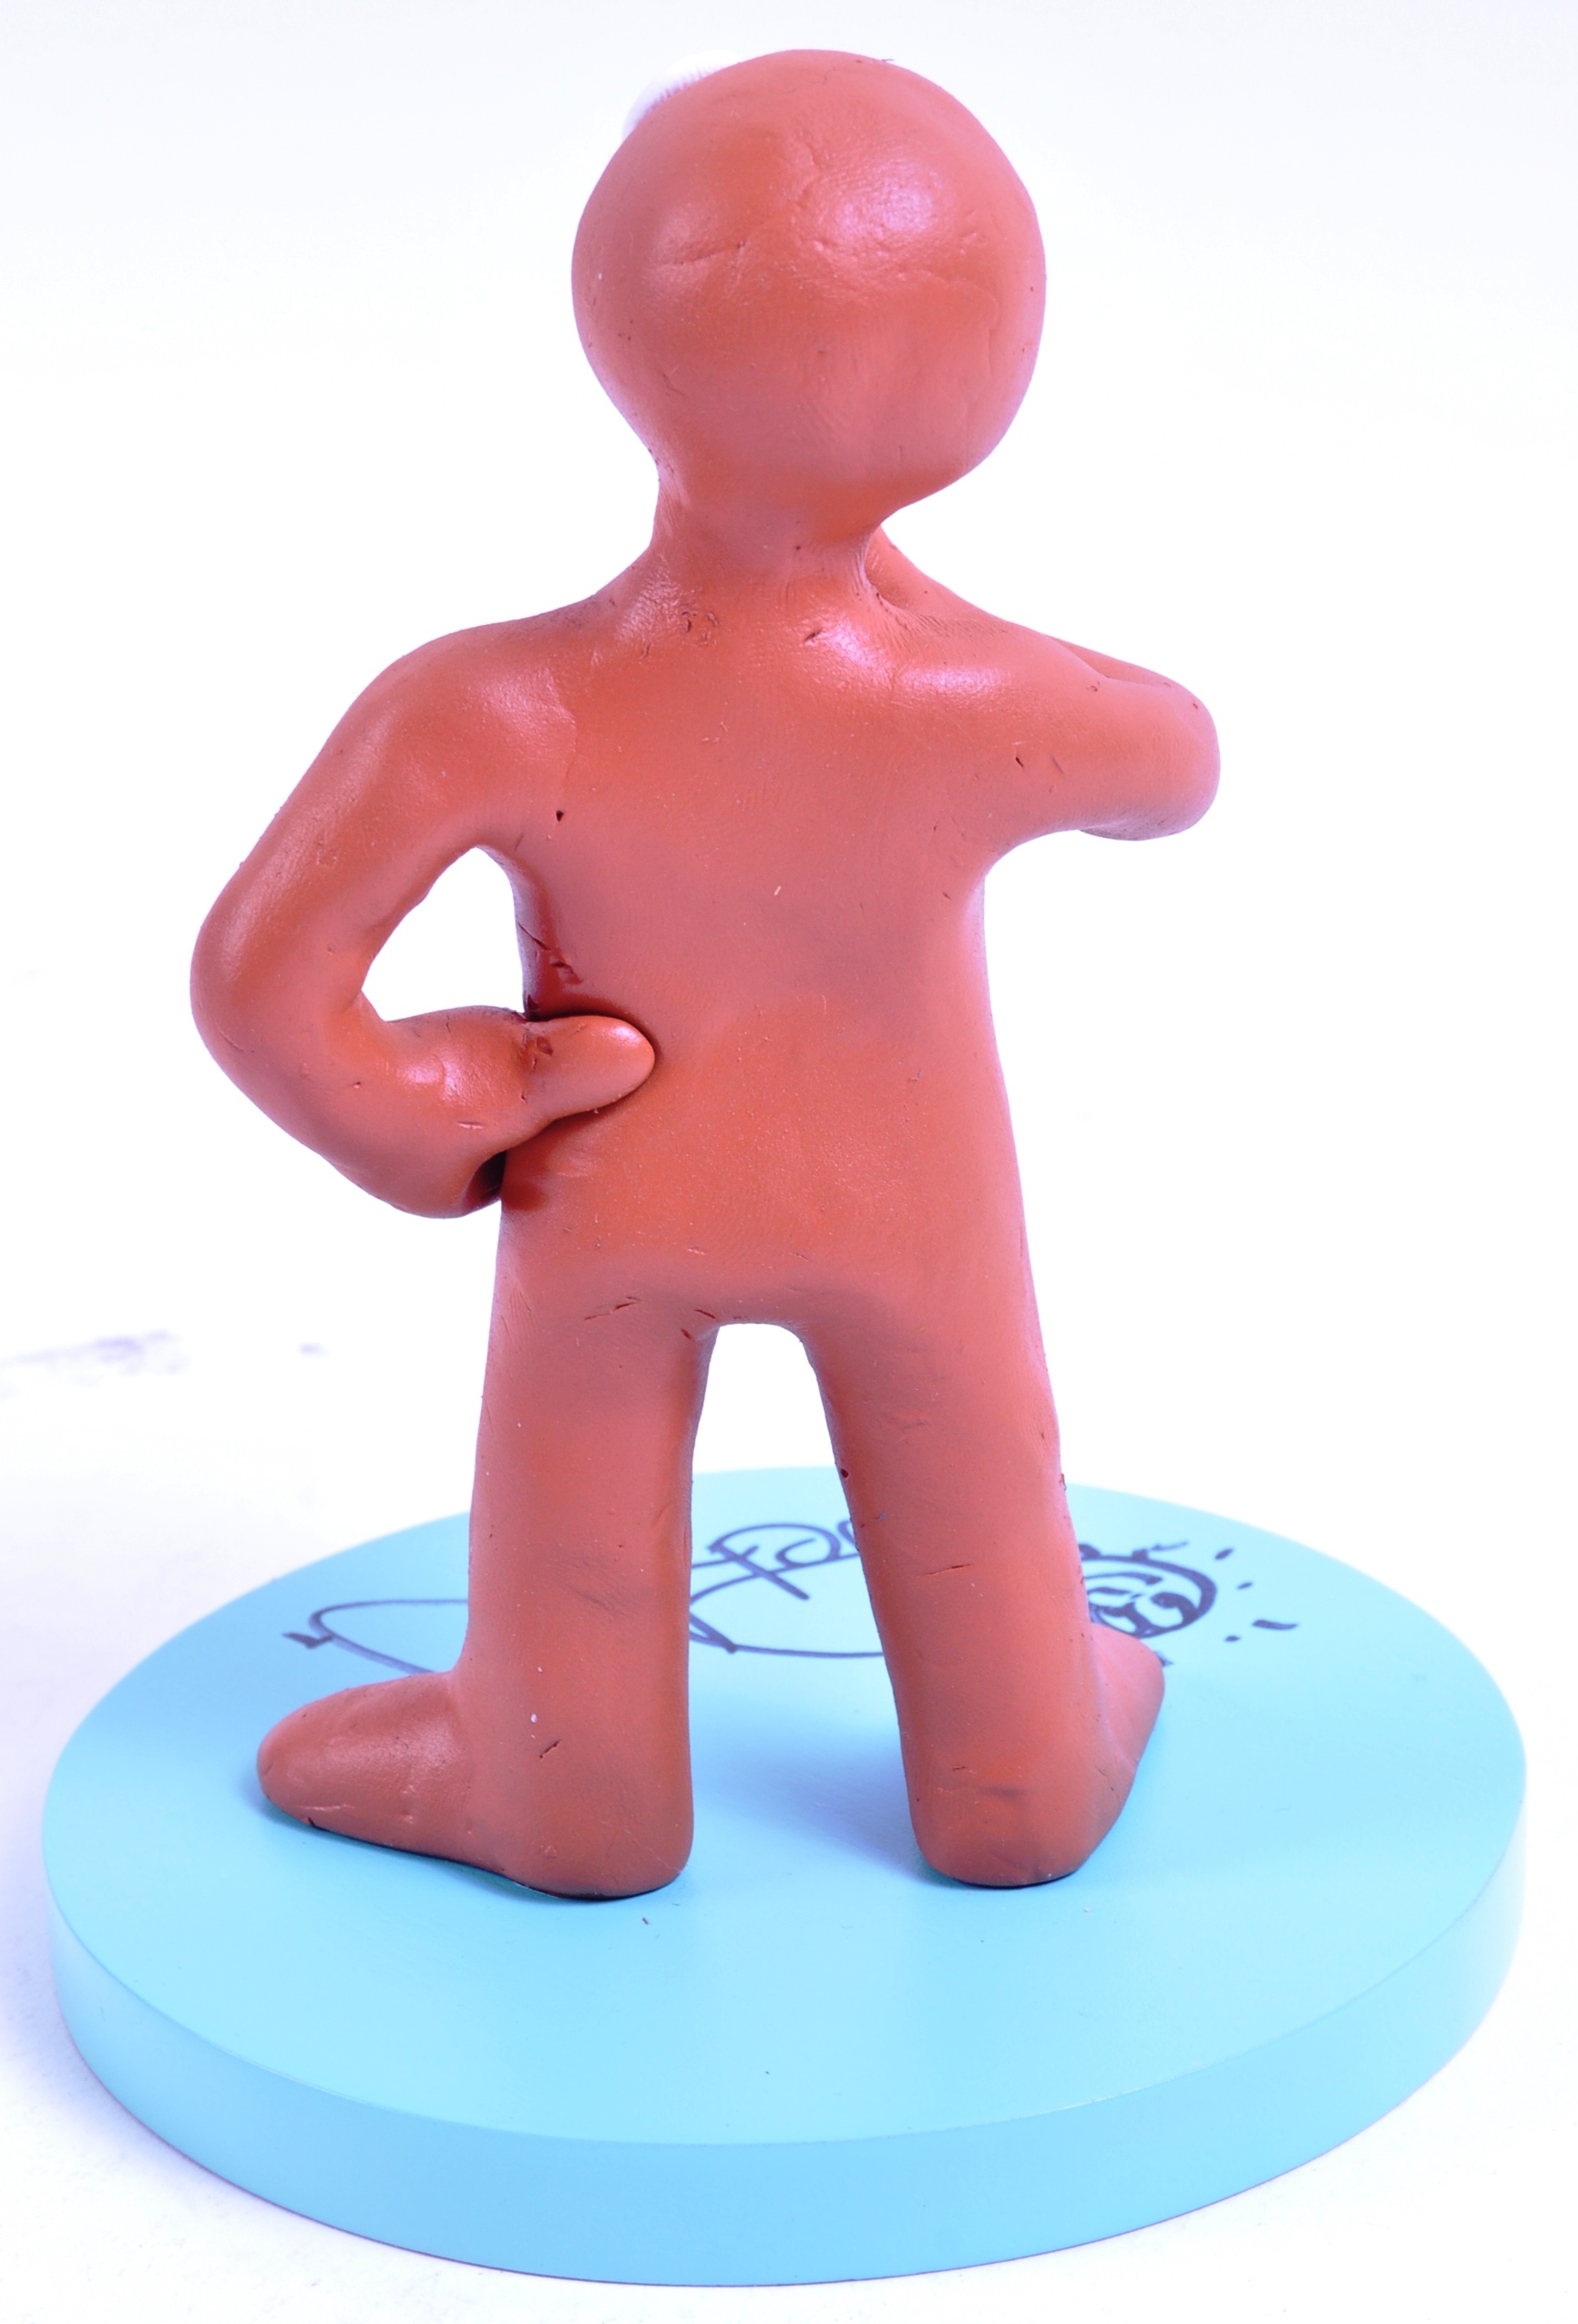 AARDMAN ANIMATIONS - MORPH - SIGNED MORPH STATUE WITH SKETCH - Image 4 of 4